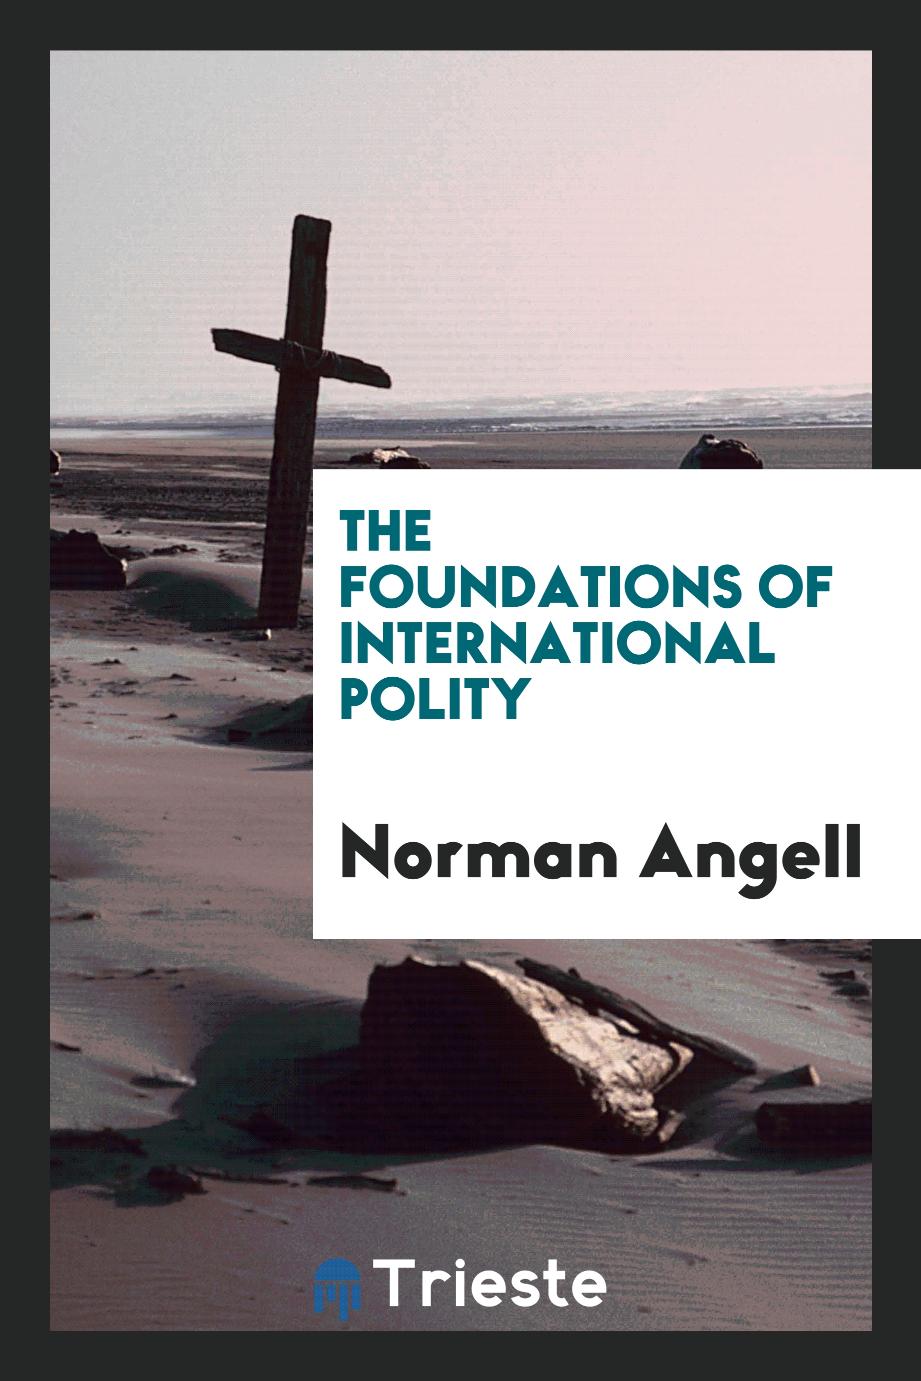 The foundations of international polity